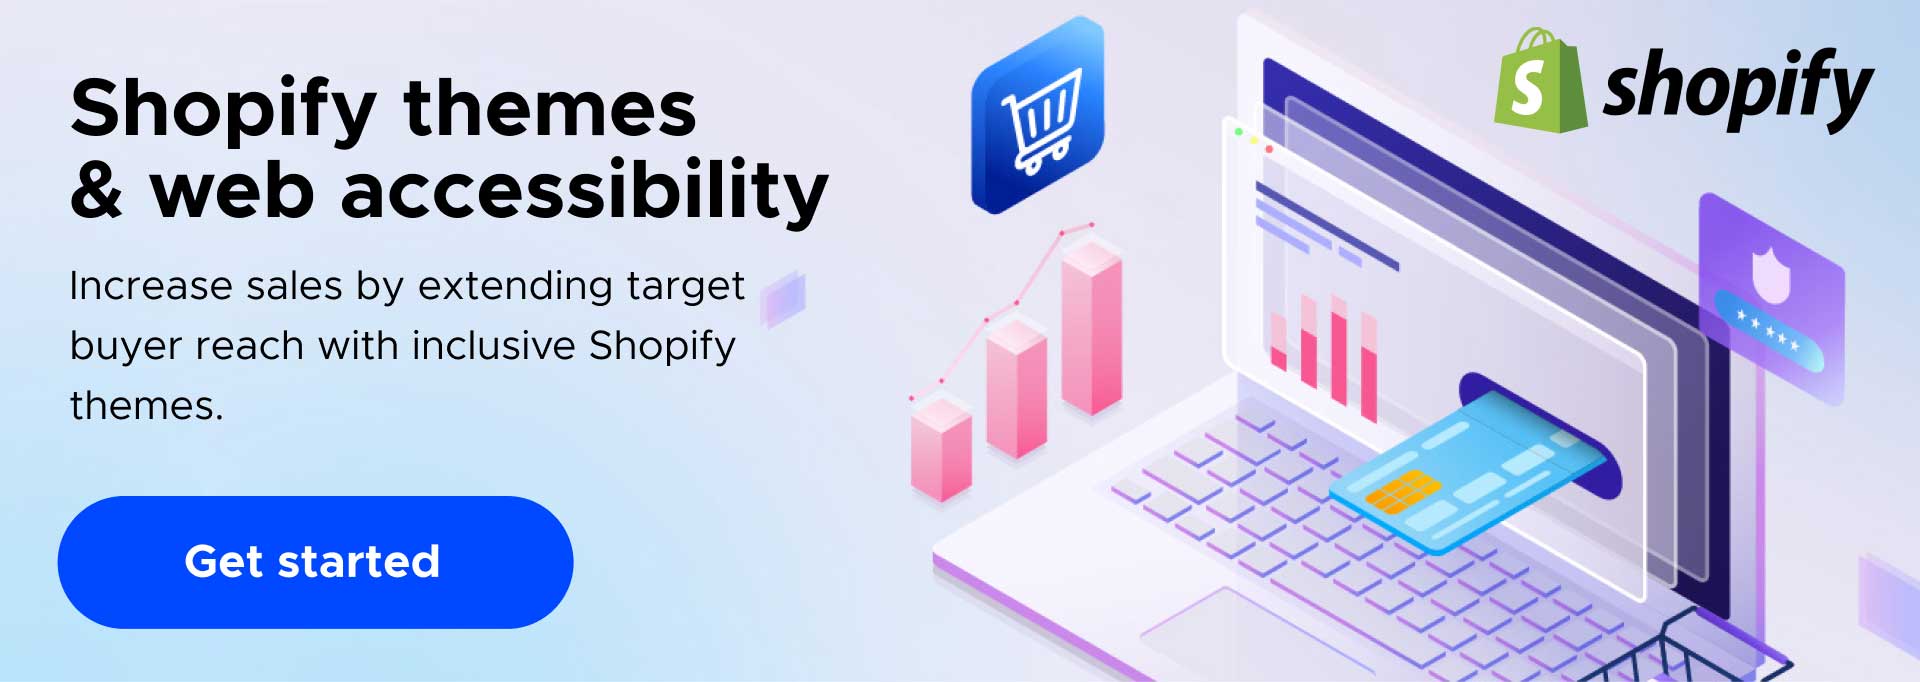 shopify themes and web accessibility